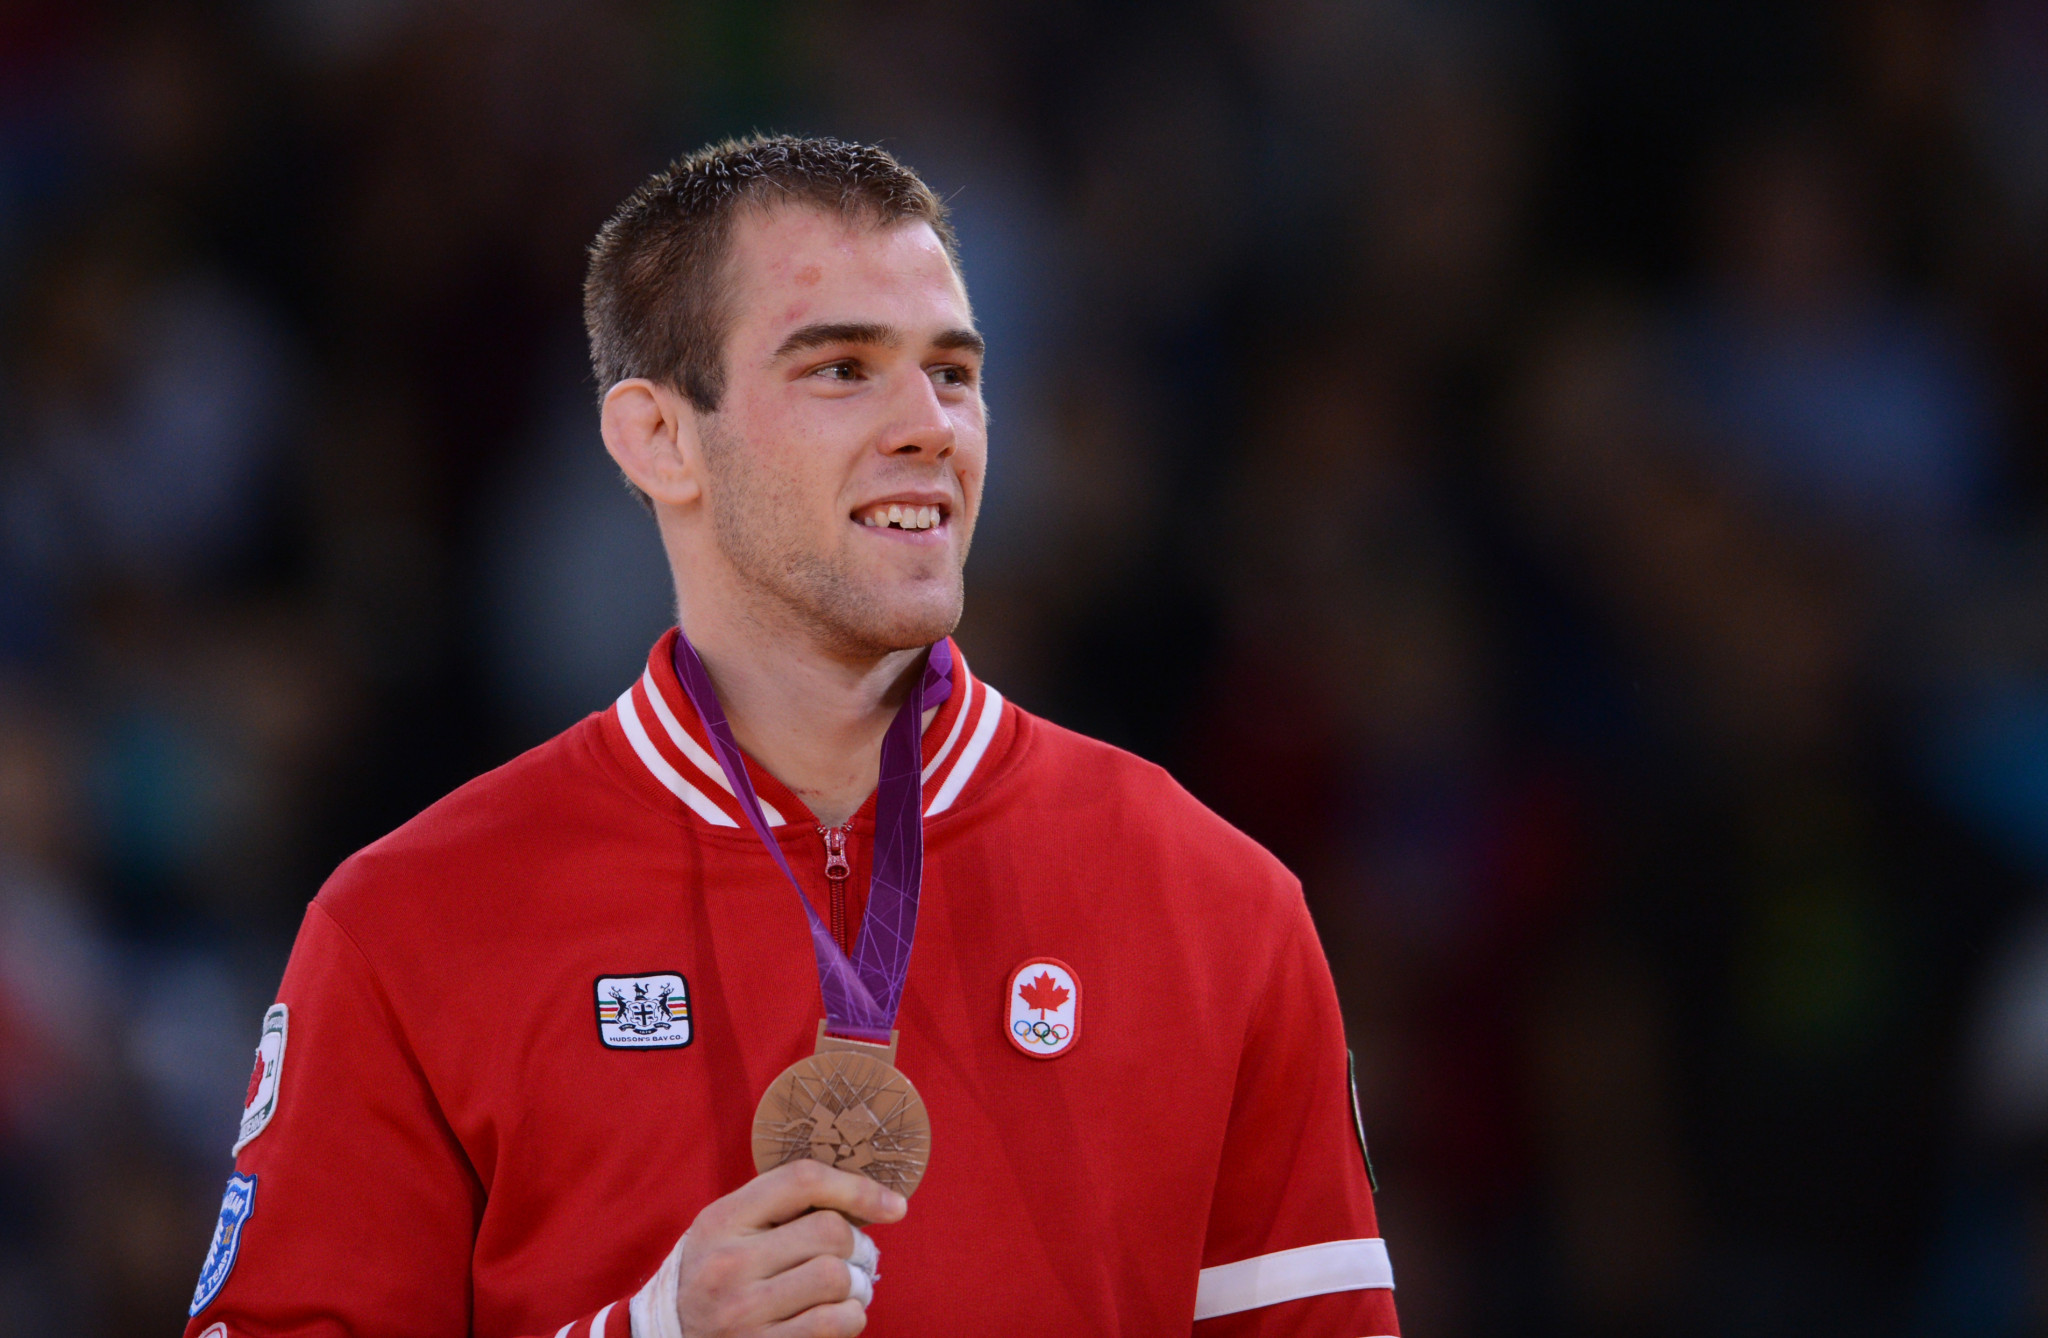 Antoine Valois-Fortier was the last Canadian judoka to win an Olympic medal, doing so at London 2012 ©Getty Images